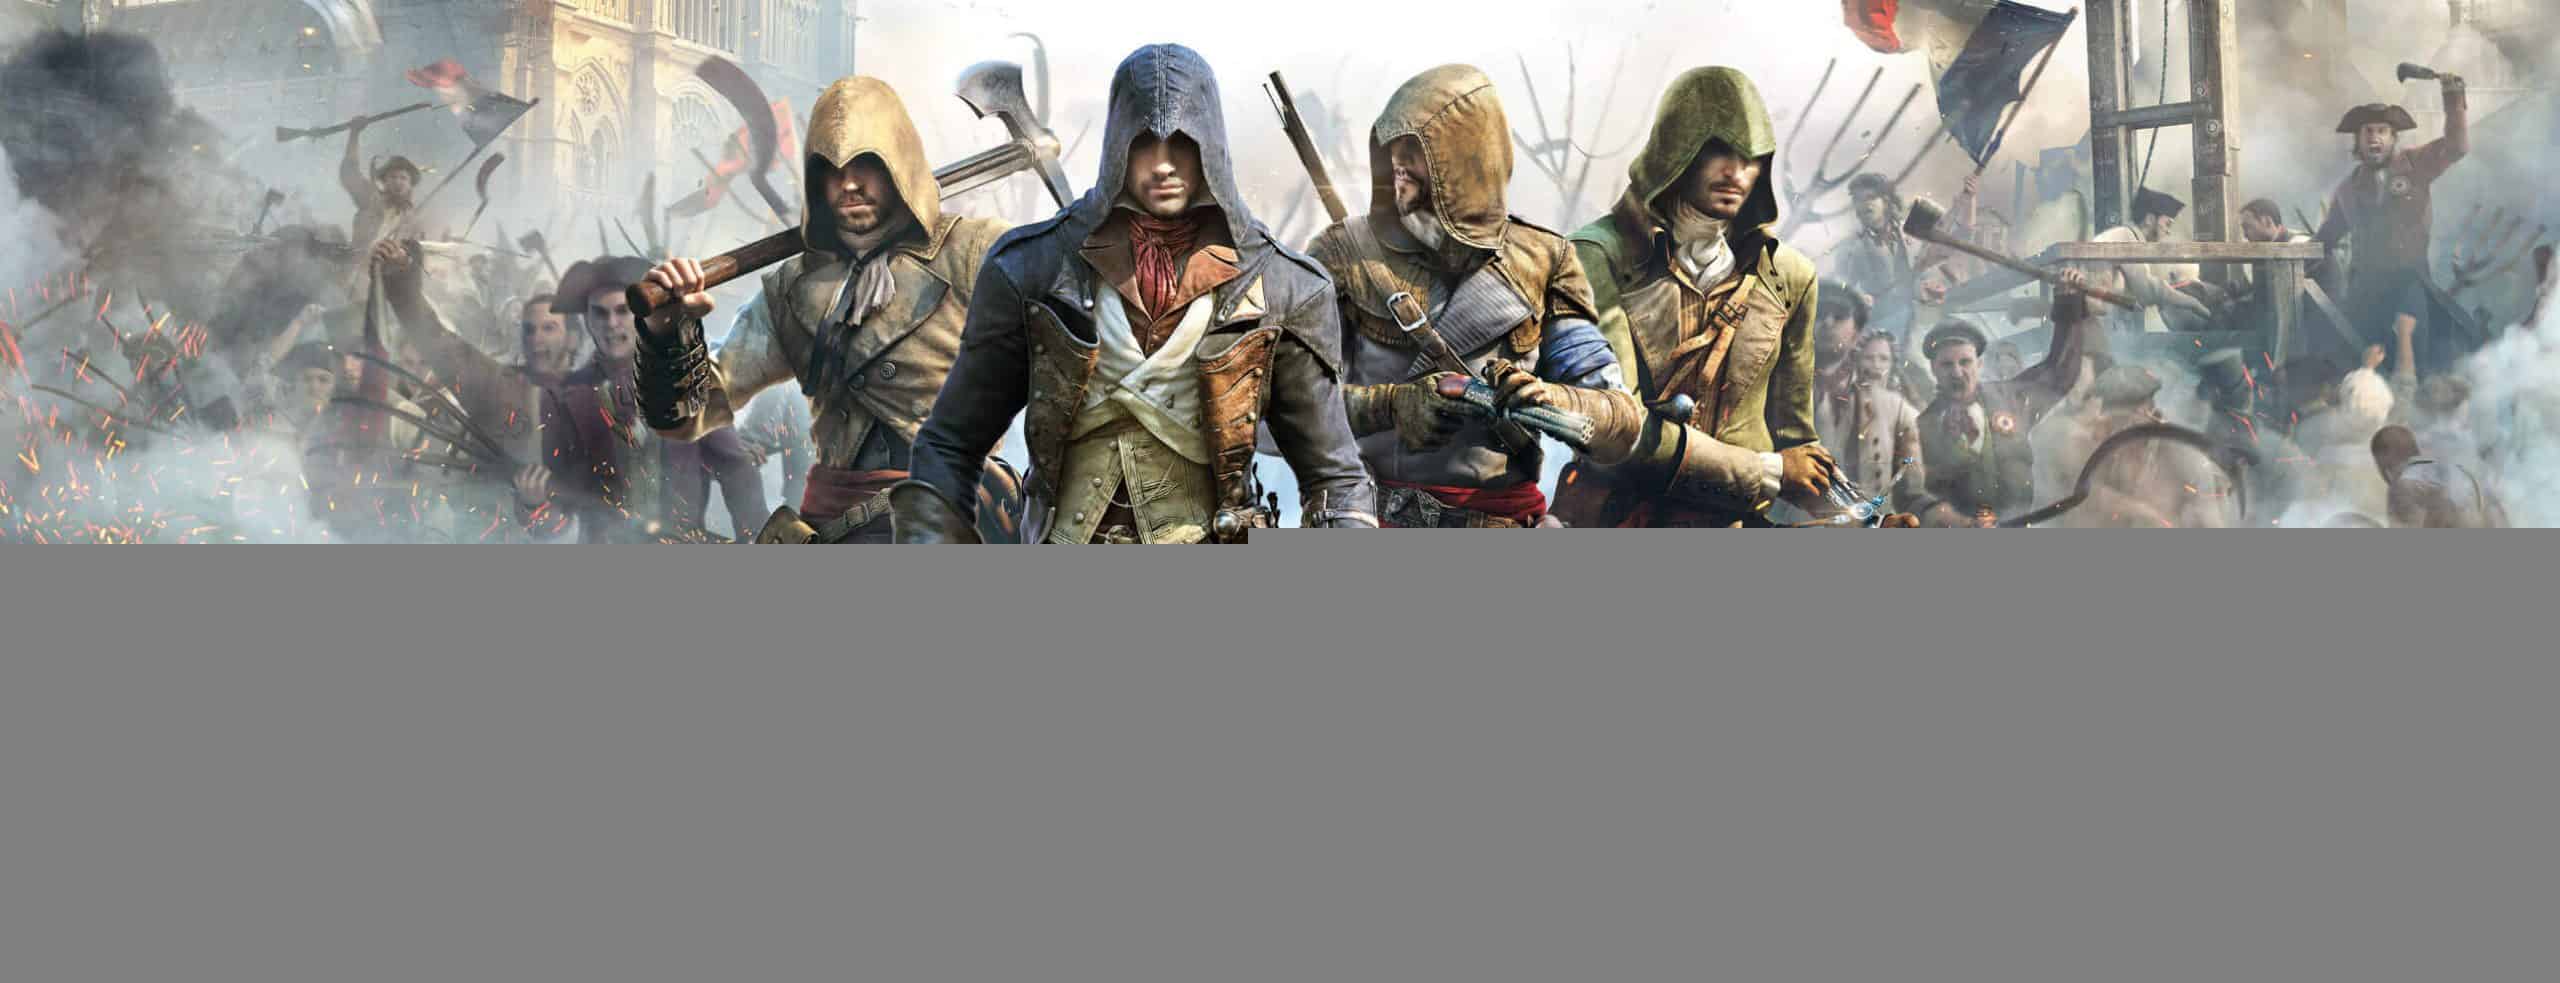 [Rumor] The Next Assassin's Creed Will be Set in Baghdad 1